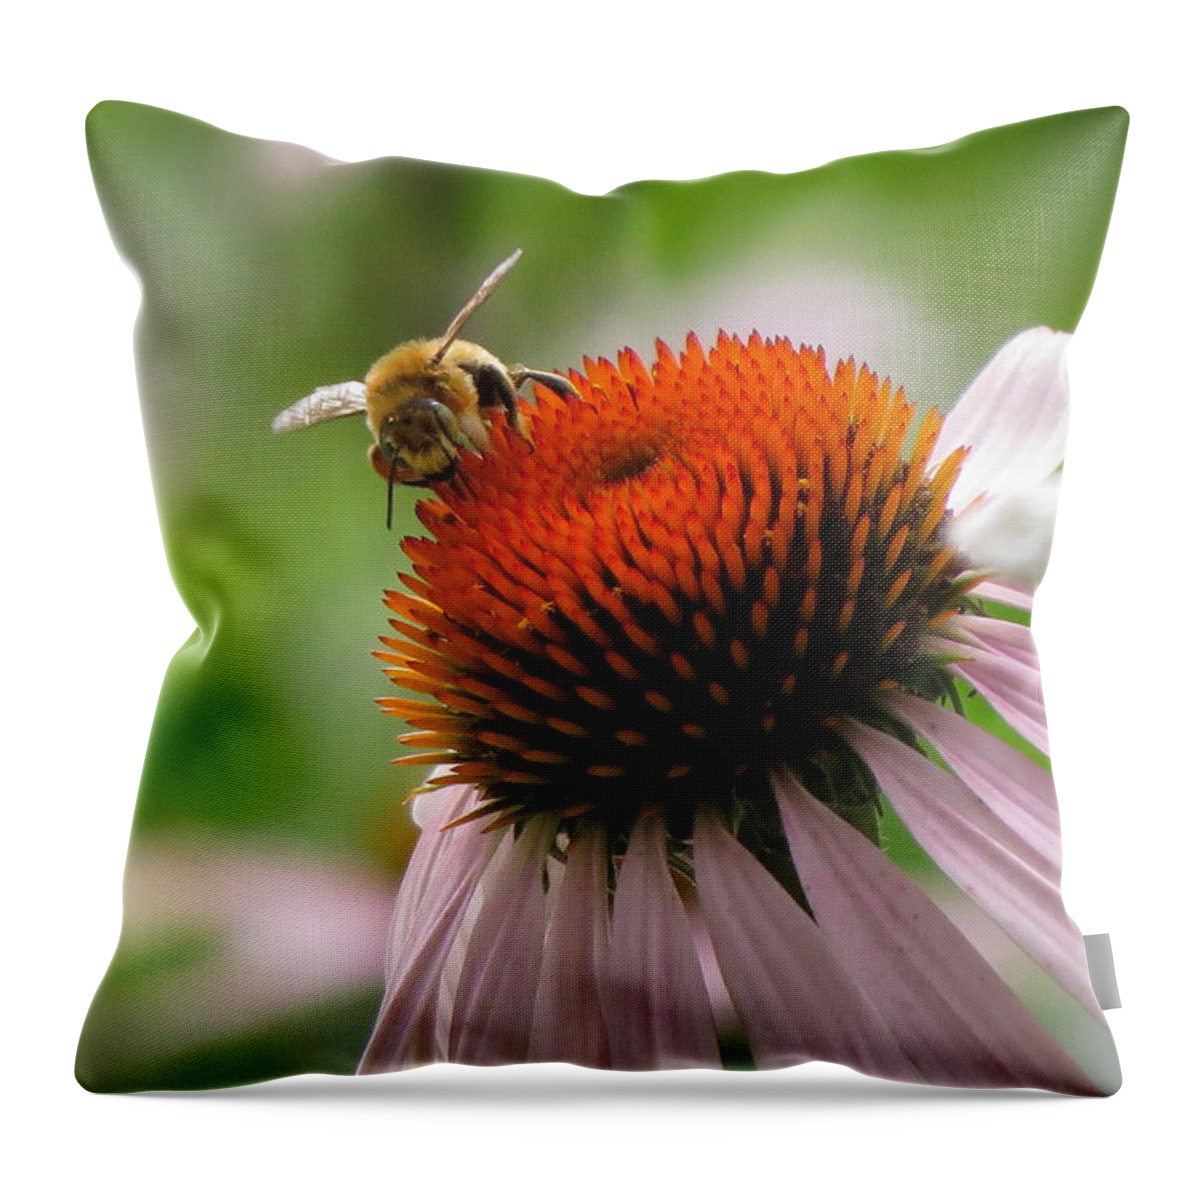  Throw Pillow featuring the photograph Buzzing the Coneflower by Kimberly Mackowski